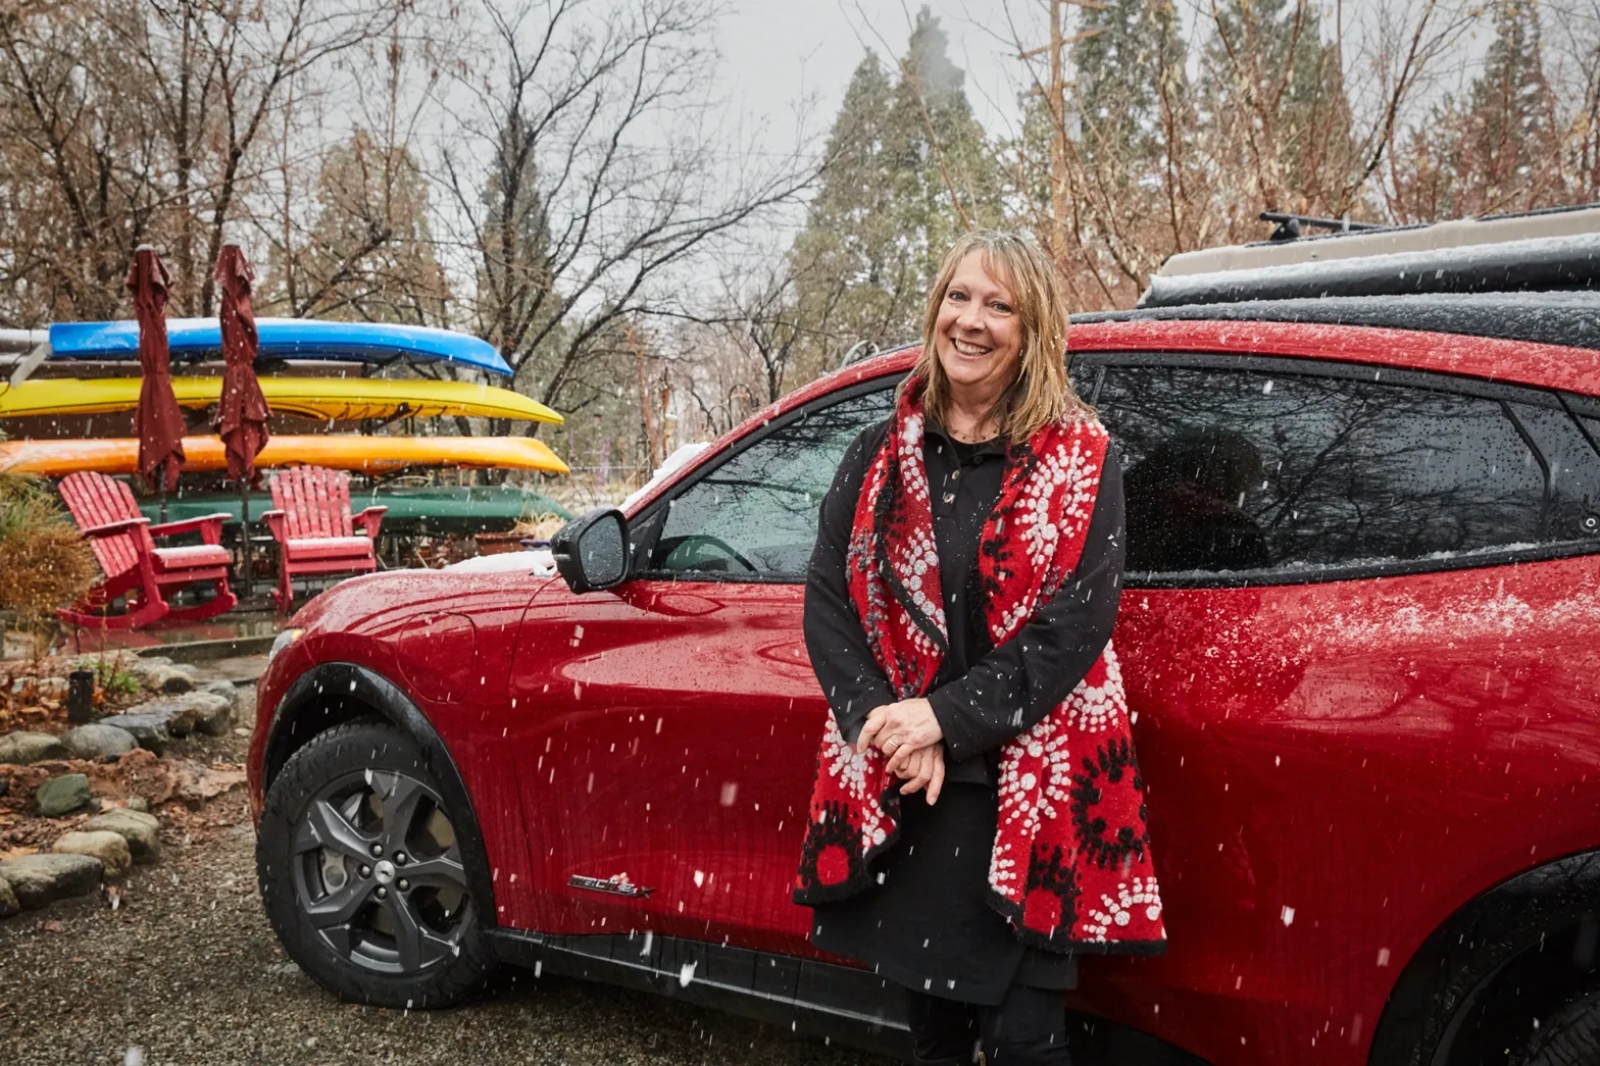 A smiling woman in a red vest stands in front of a red car while it snows.